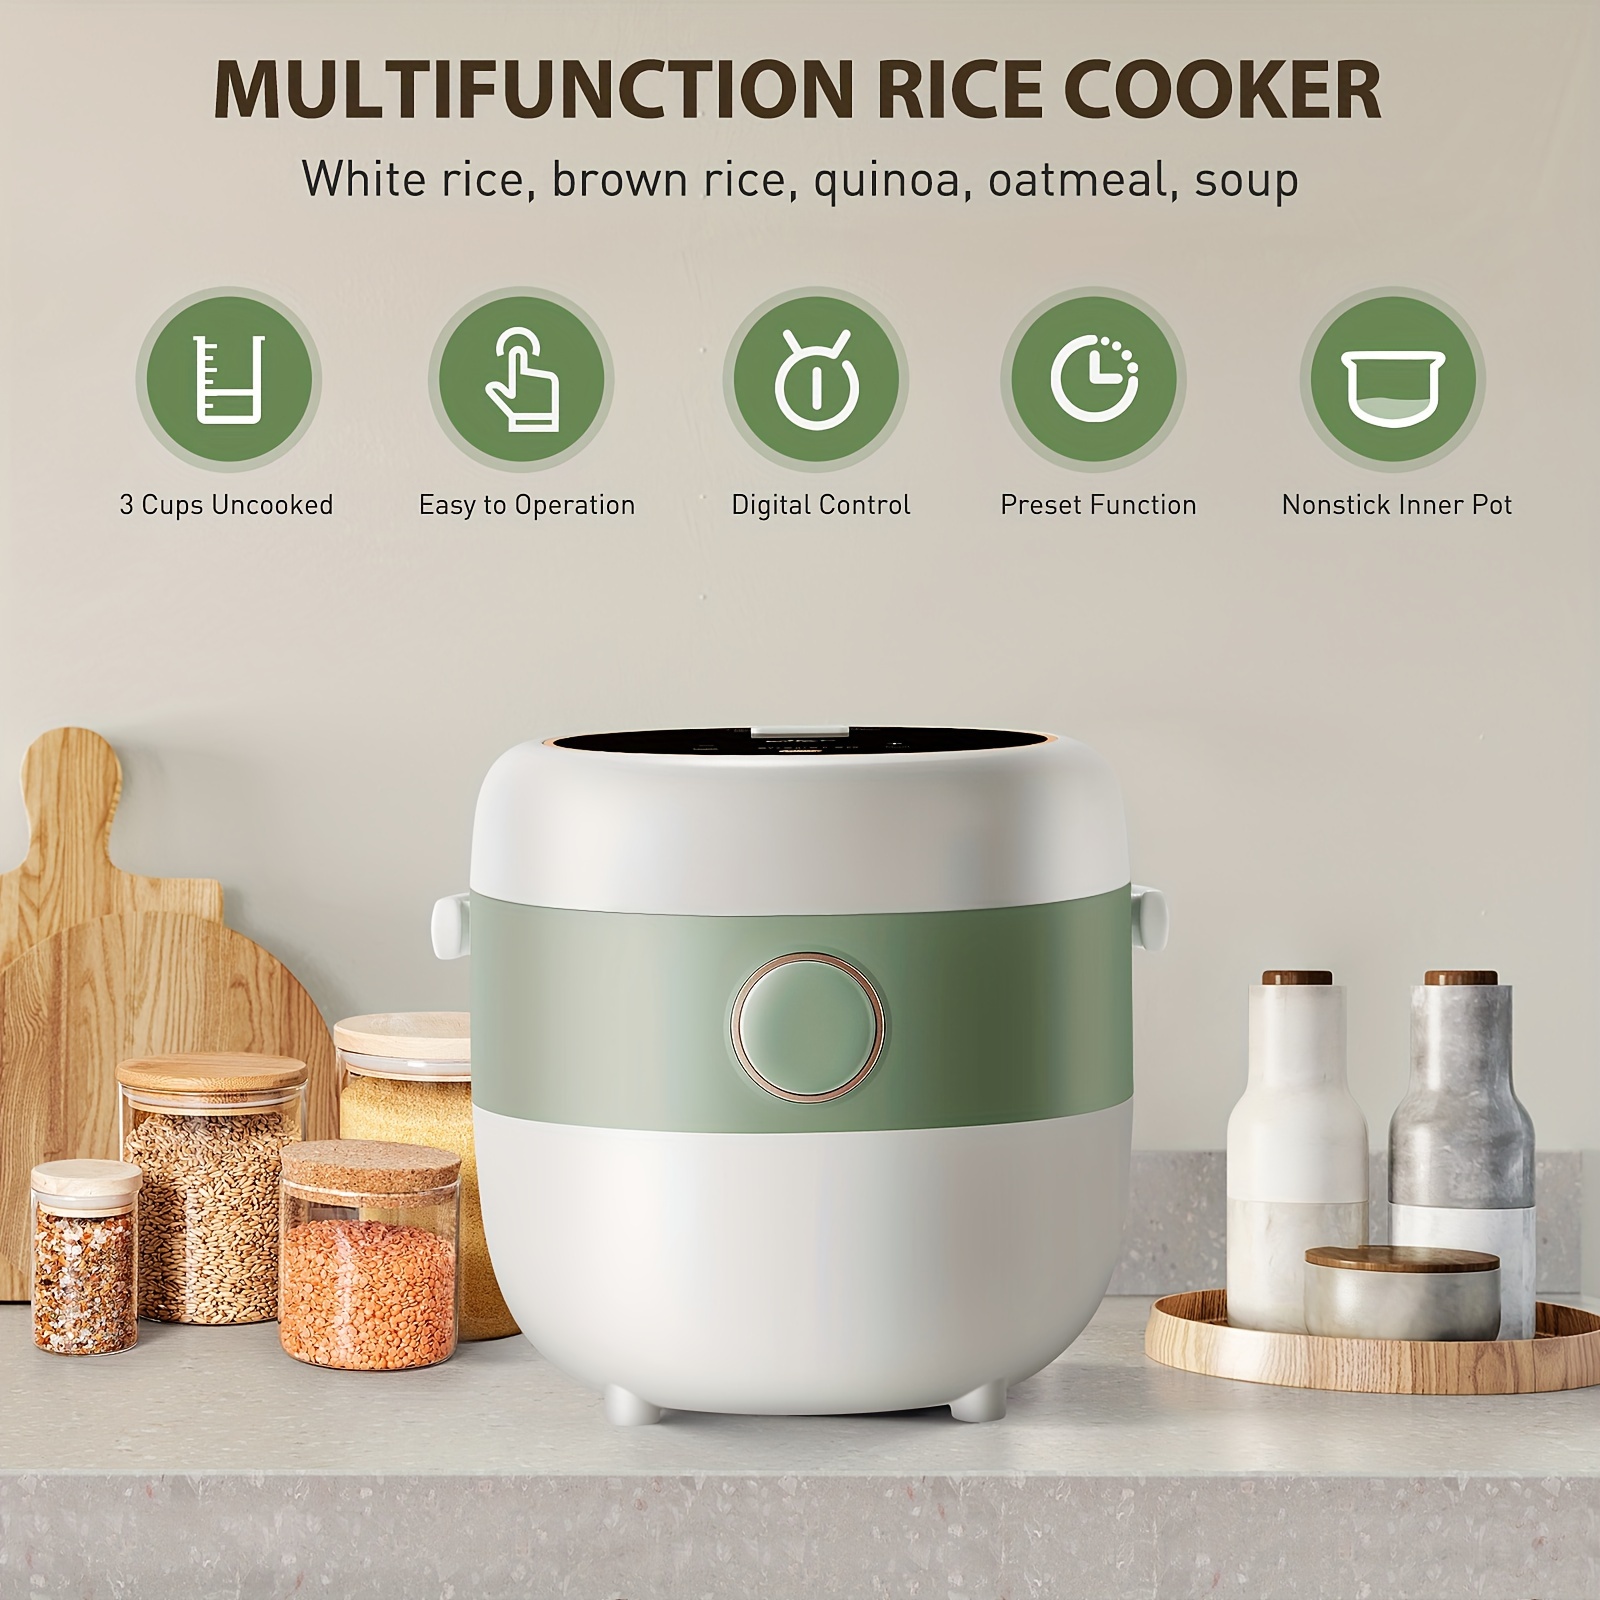 

Bear Rice Cooker 3 Cups (uncooked), 3d Heating And , Healthy Nonstick Small Rice Cooker, Pfas-free, Touch-screen, For White/brown Rice Oatmeal Soup, 1.6l White